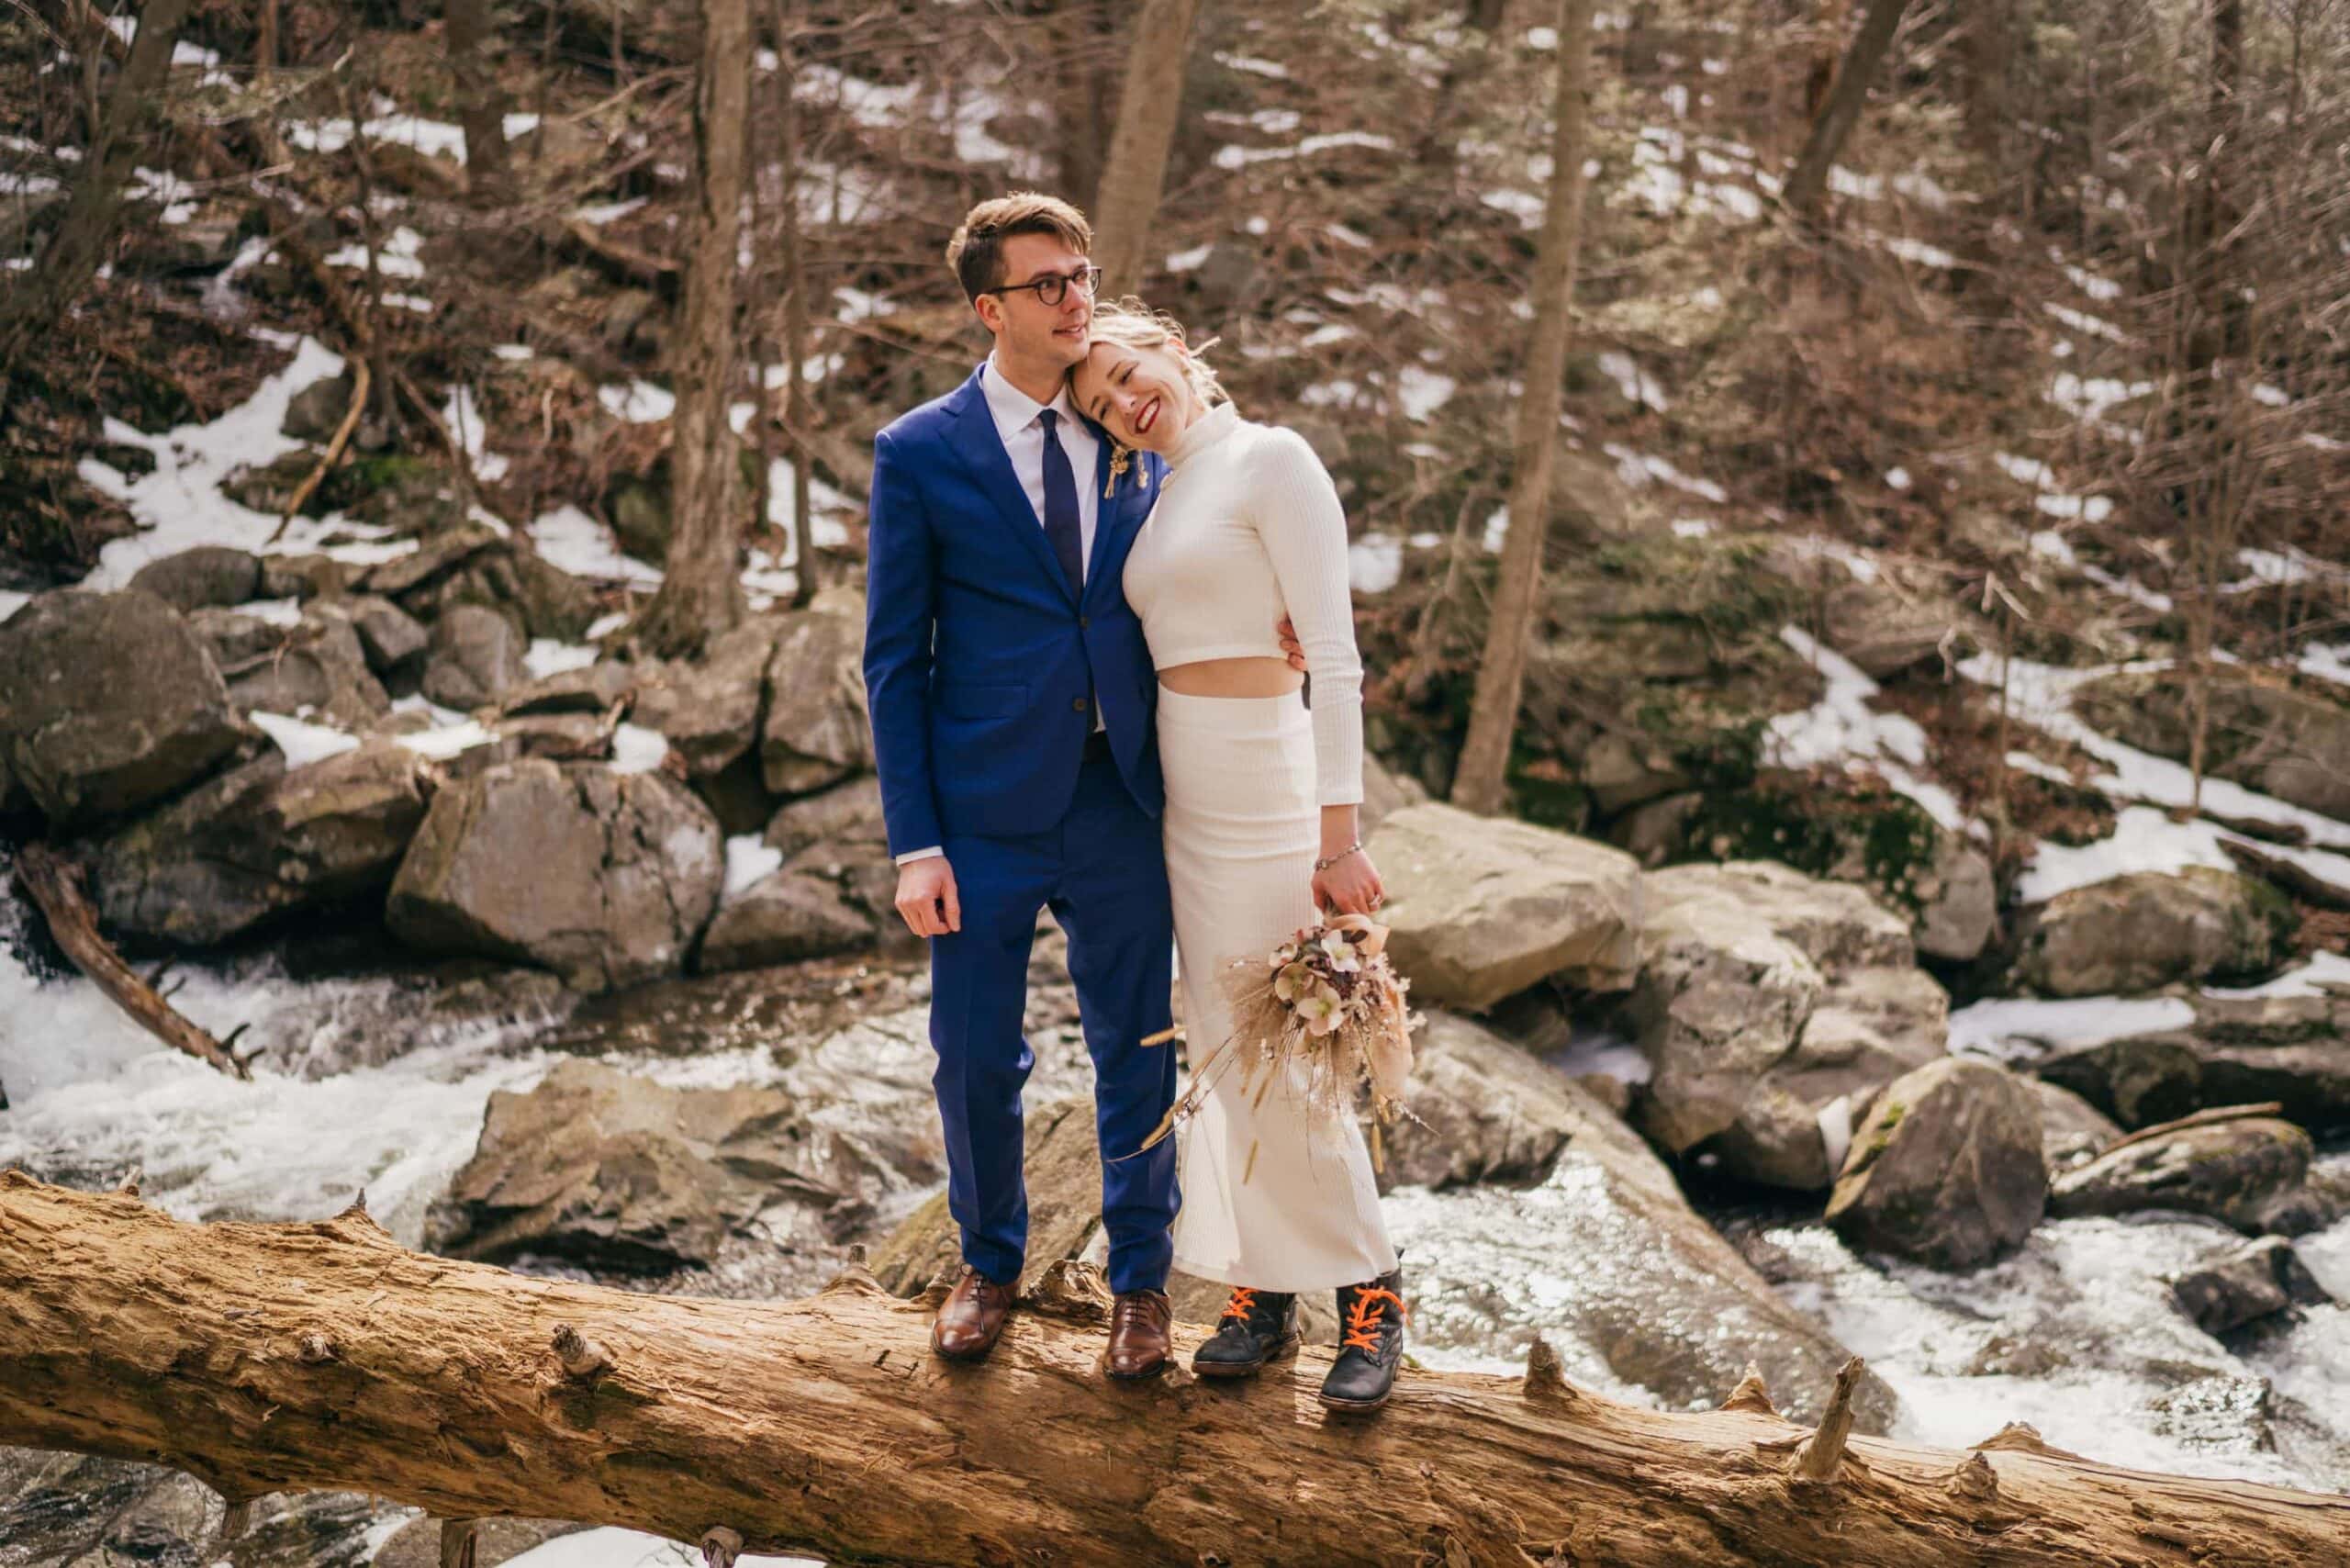 Bride in dress and hiking boots smiles and leans on groom's shoulder as he puts his arm around her waist, standing on a log over a river in winter Hudson Valley forest.